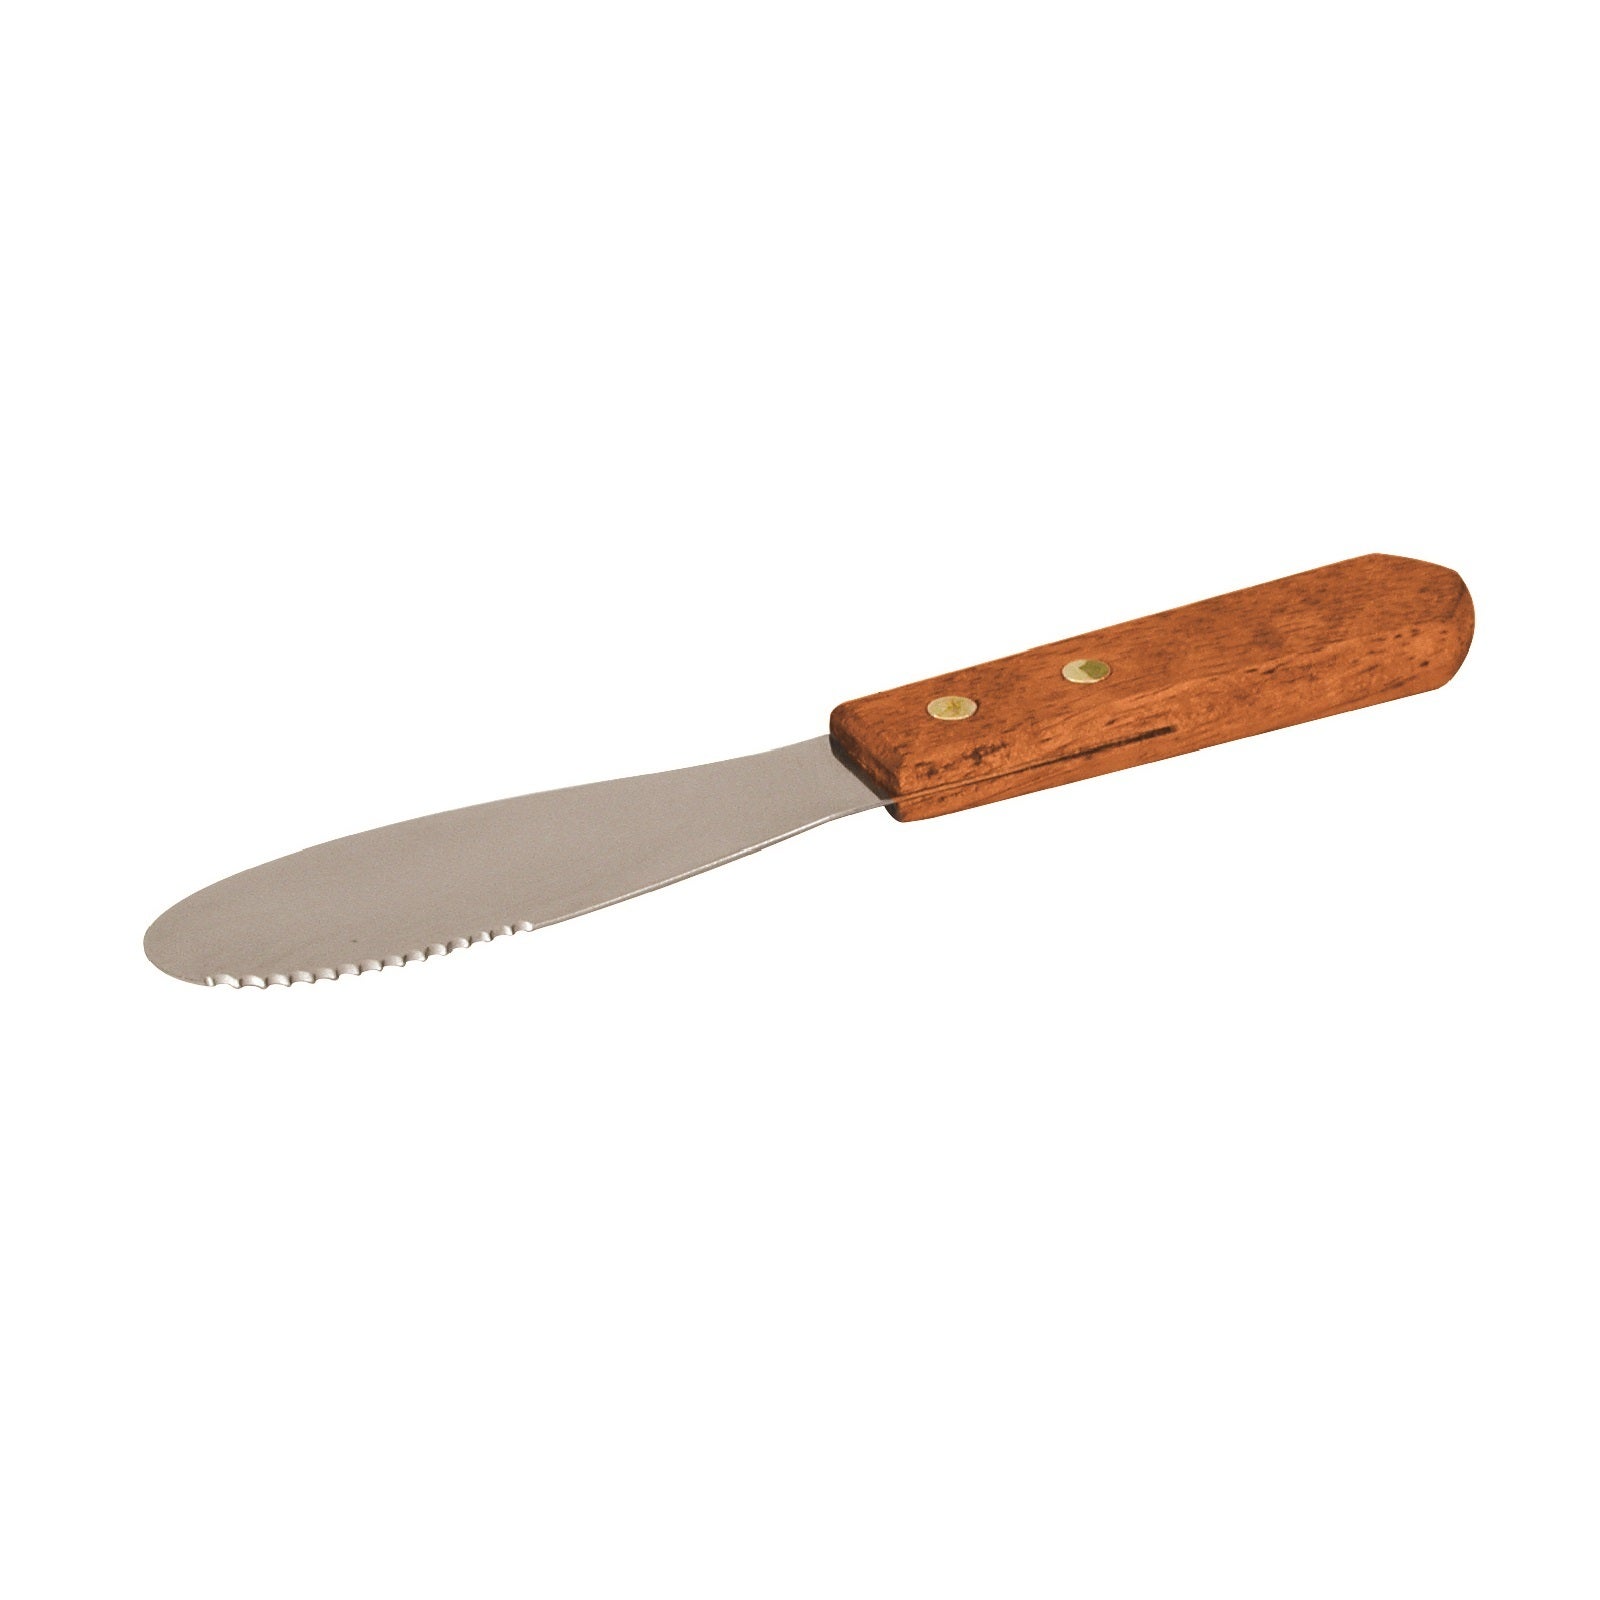 Trenton Butter Knife with Wood Handle